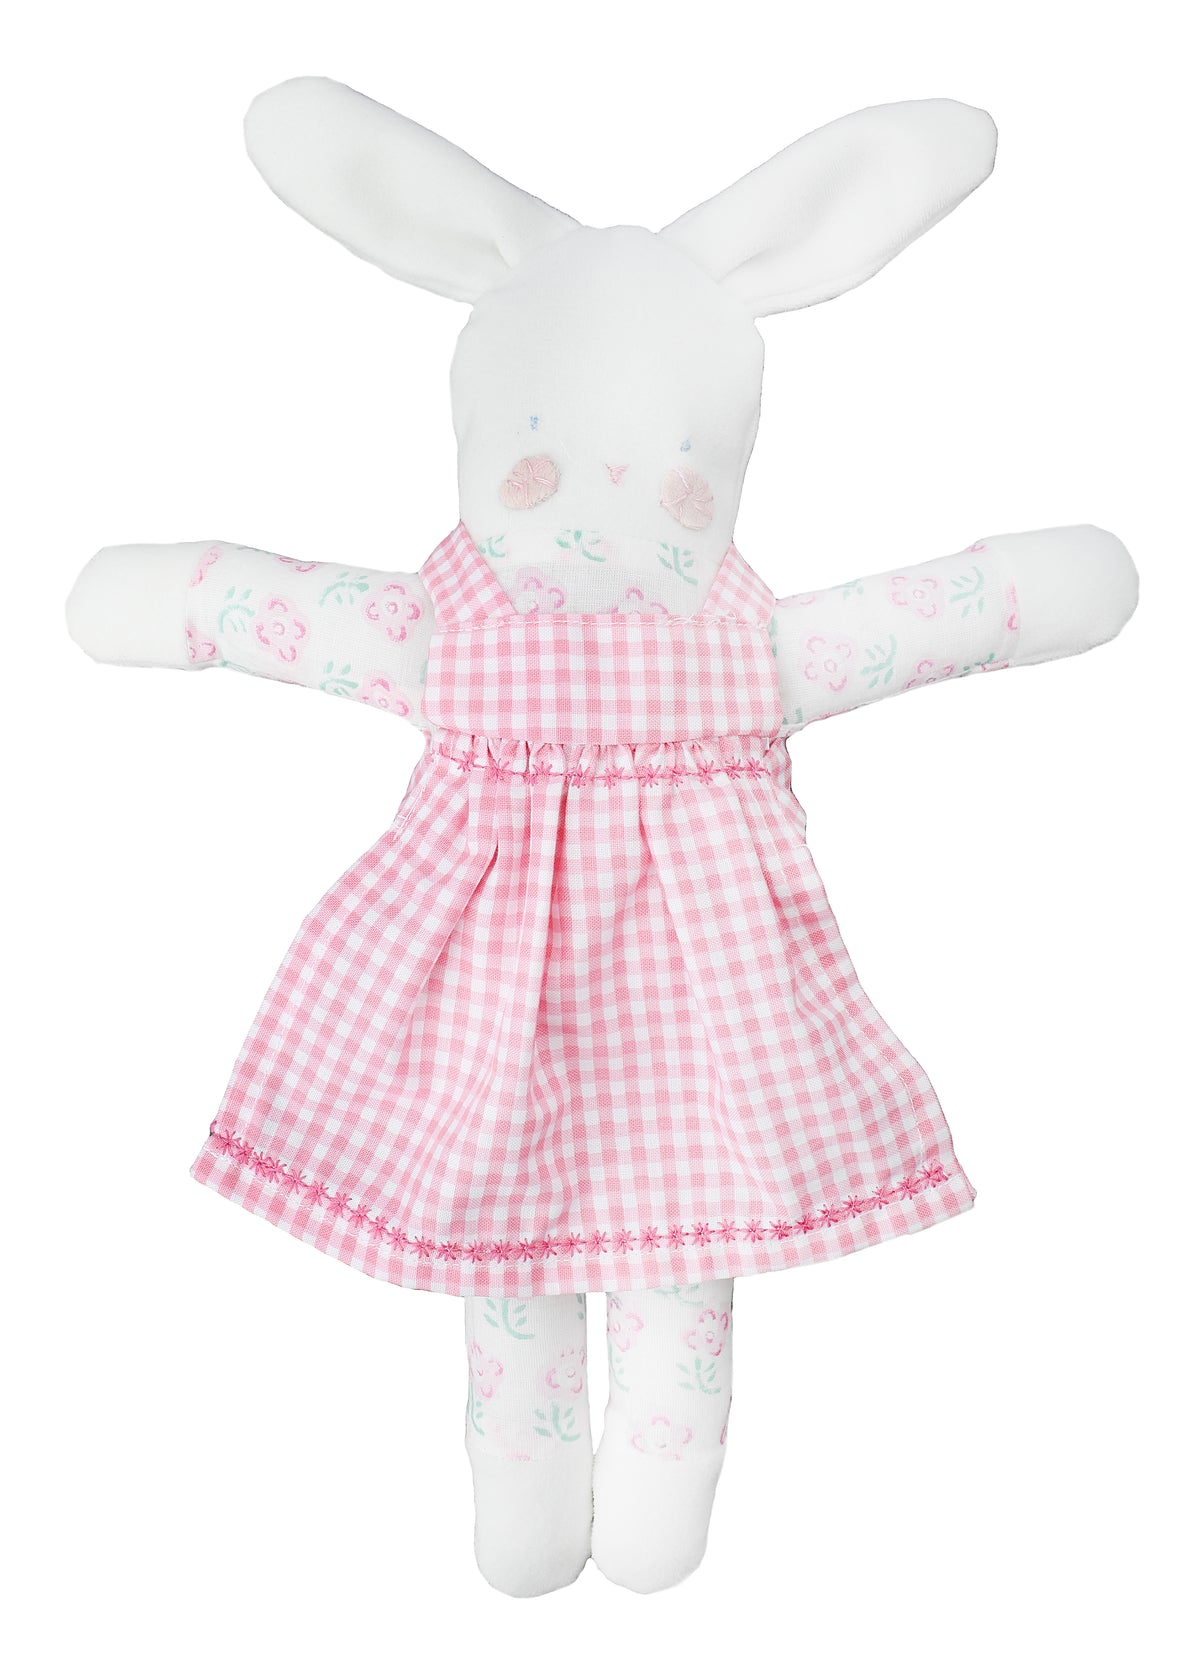 Personalized Girl Bunny Doll